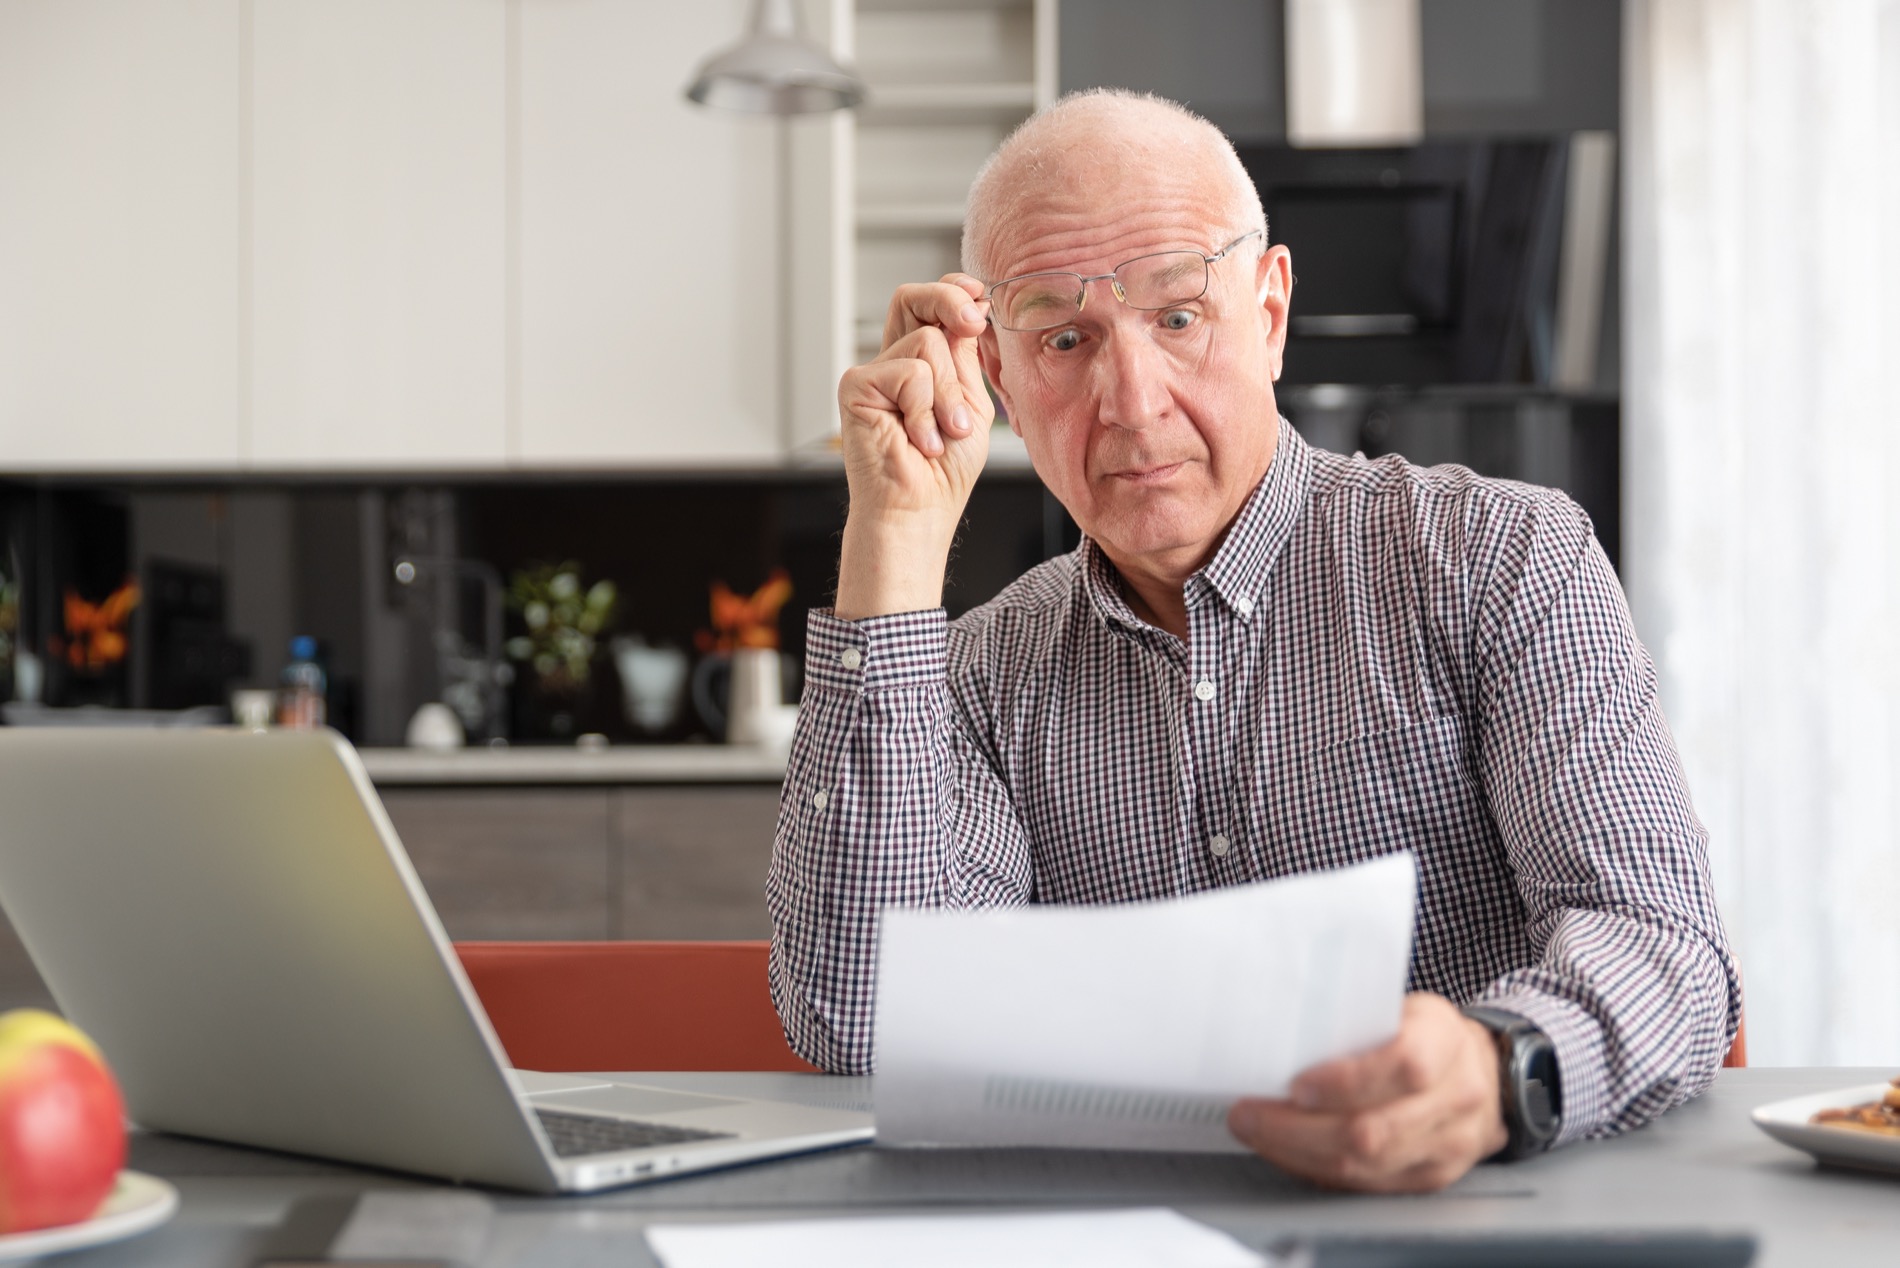 Senior man at his laptop, worried about his retirement income and savings.